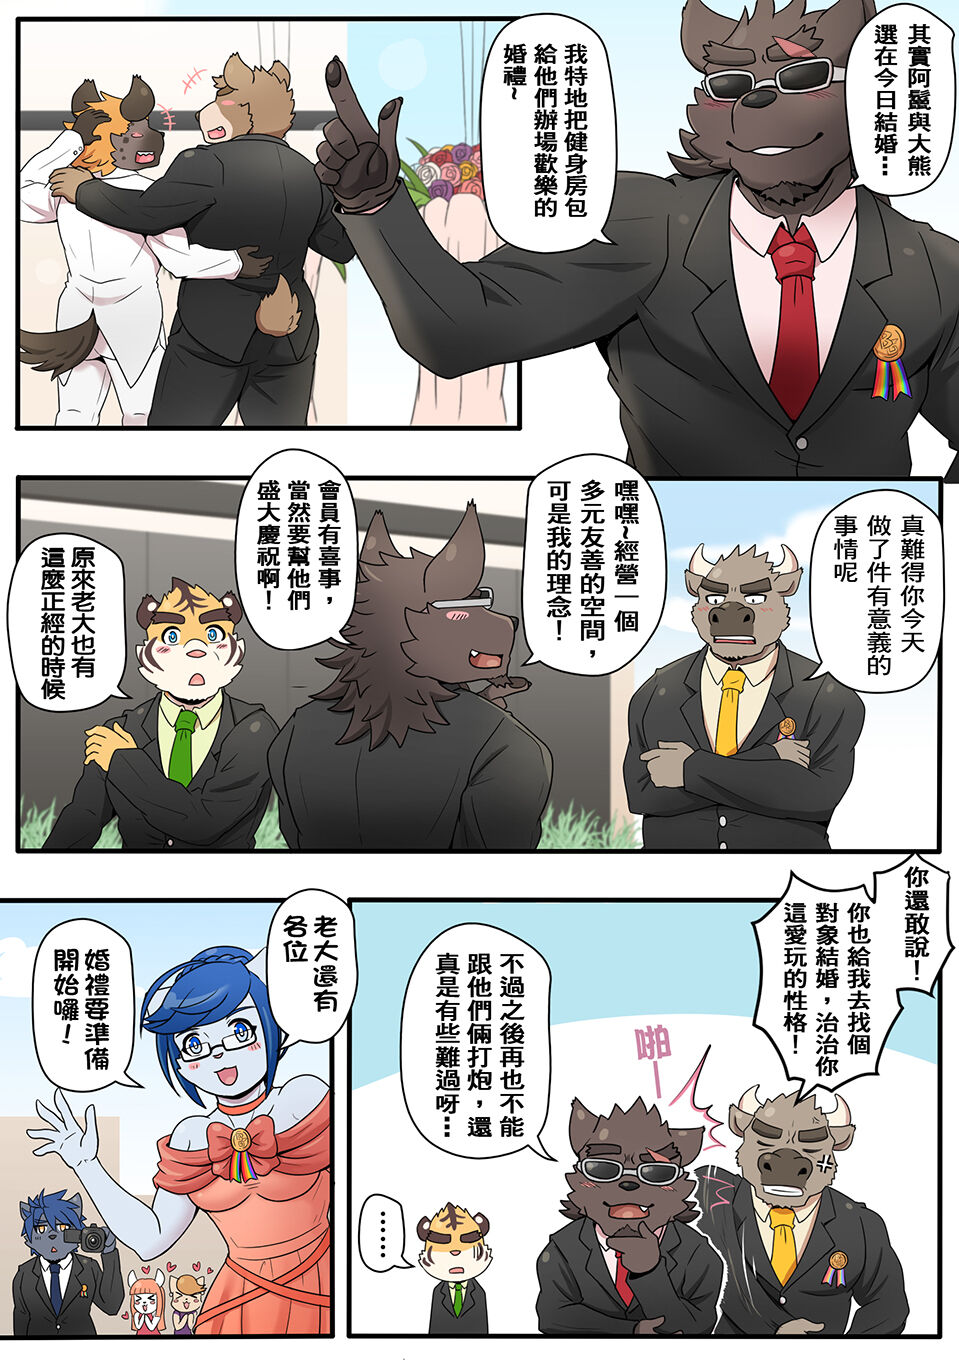 [Ripple Moon (漣漪月影)] Gym Pals - Pal and his gym pals' gaily daily life [Chinese] (ongoing) - Page 24